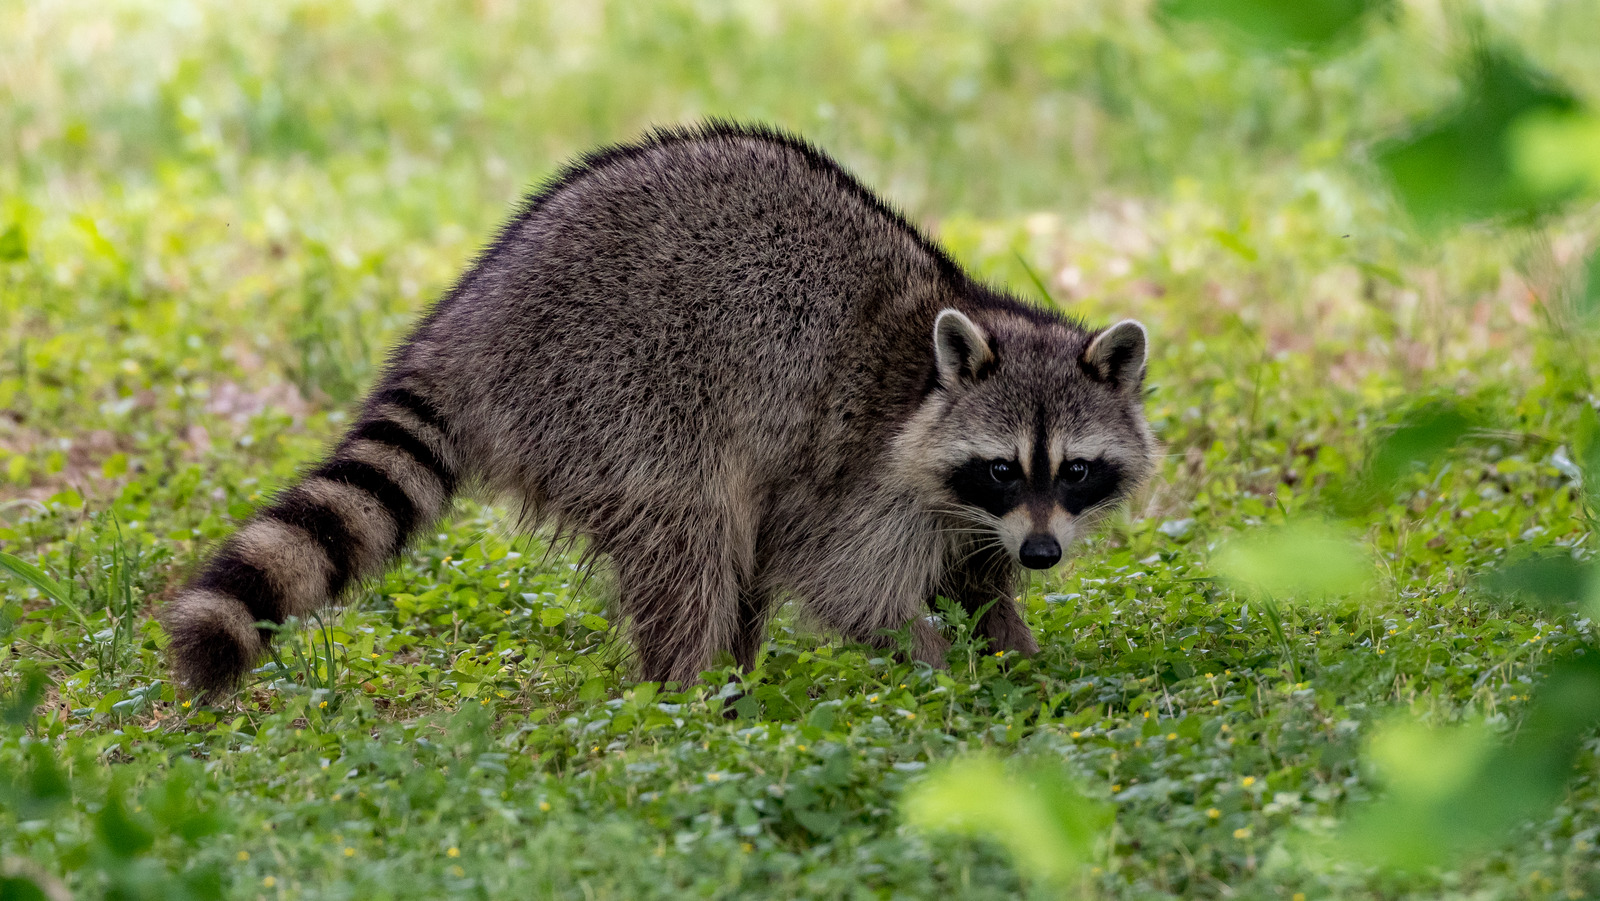 Humane Ways To Keep Critters Out Of Your Yard